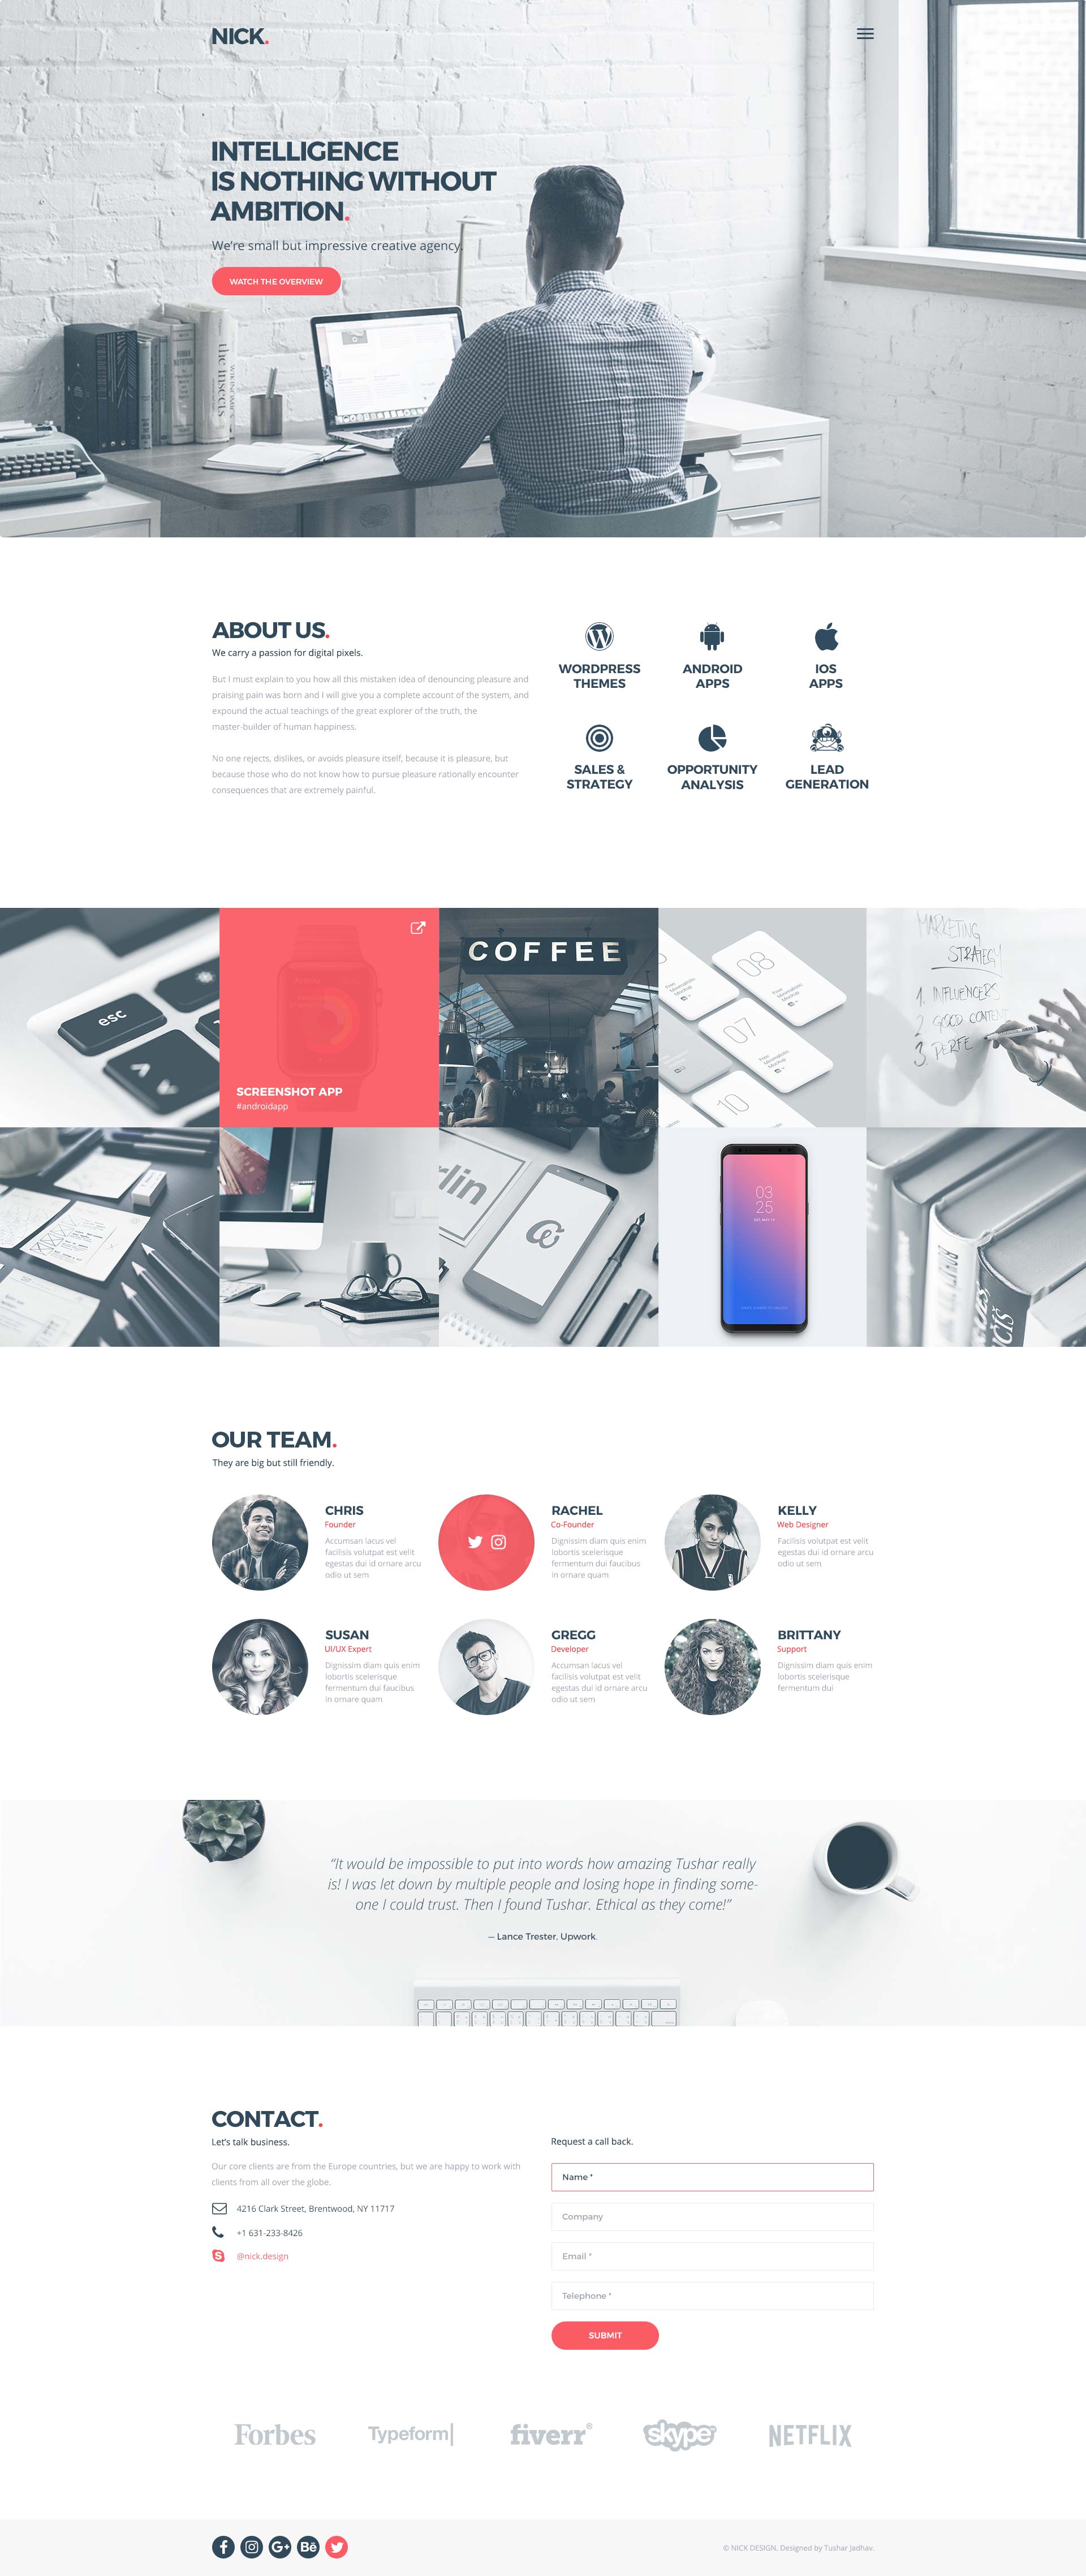 NICK Design - One Page Agency Website Template